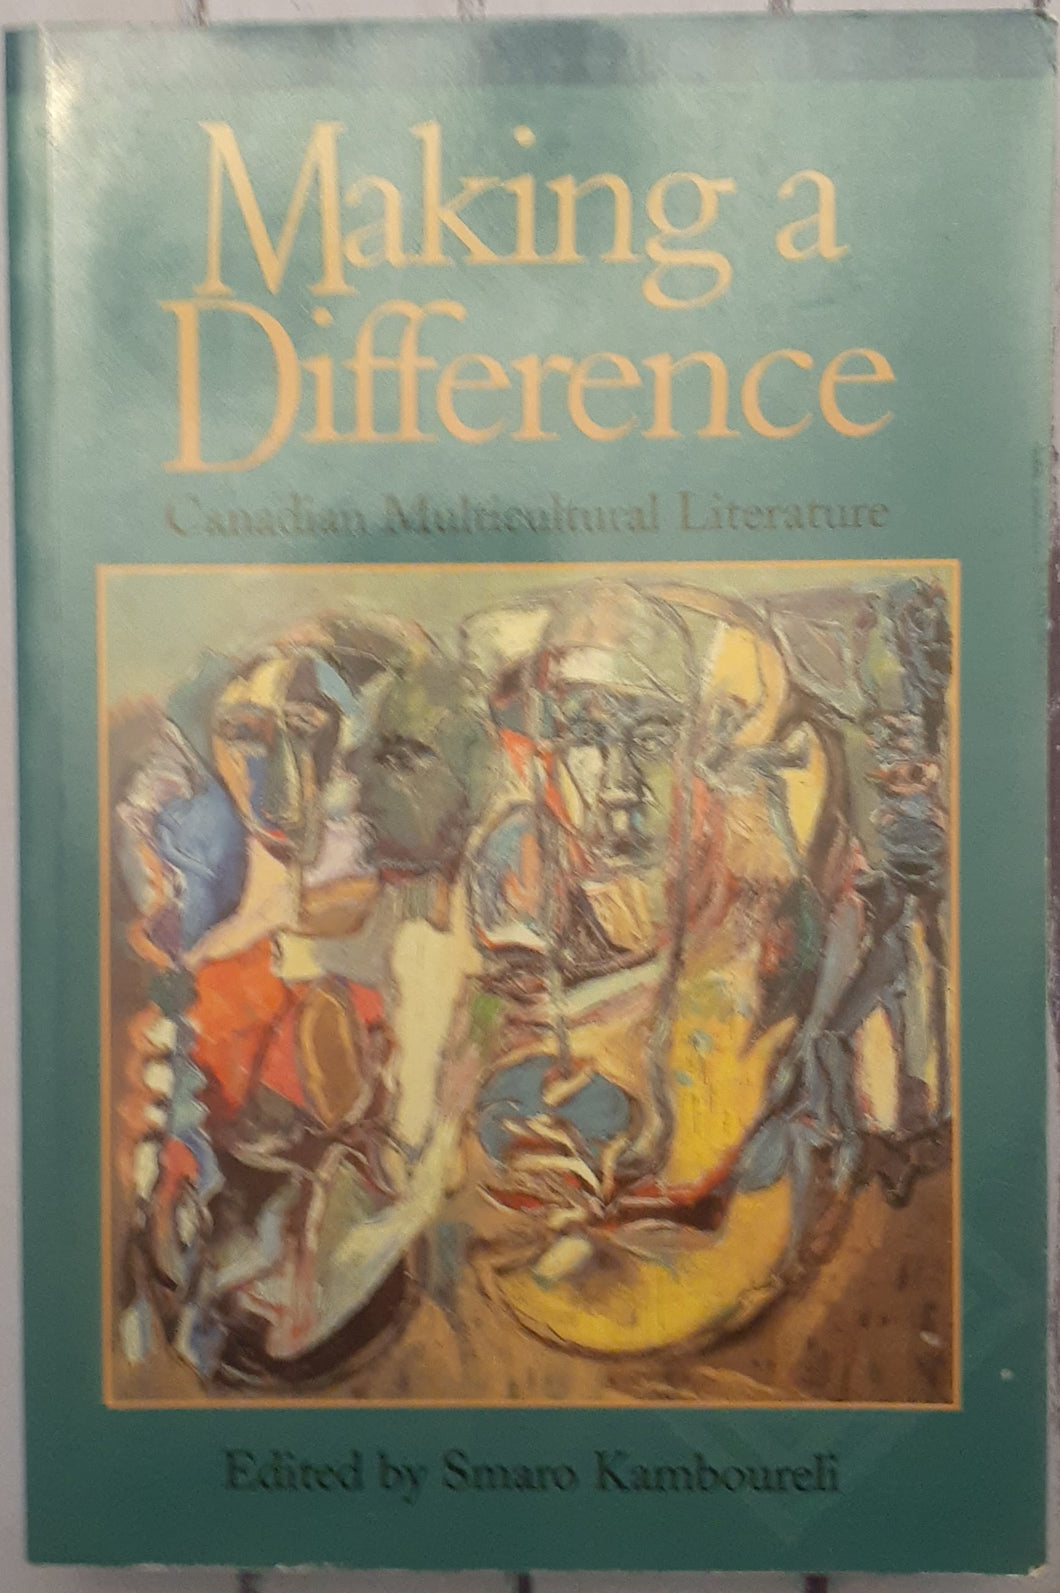 Making a Difference: Canadian Multicultural Literatures